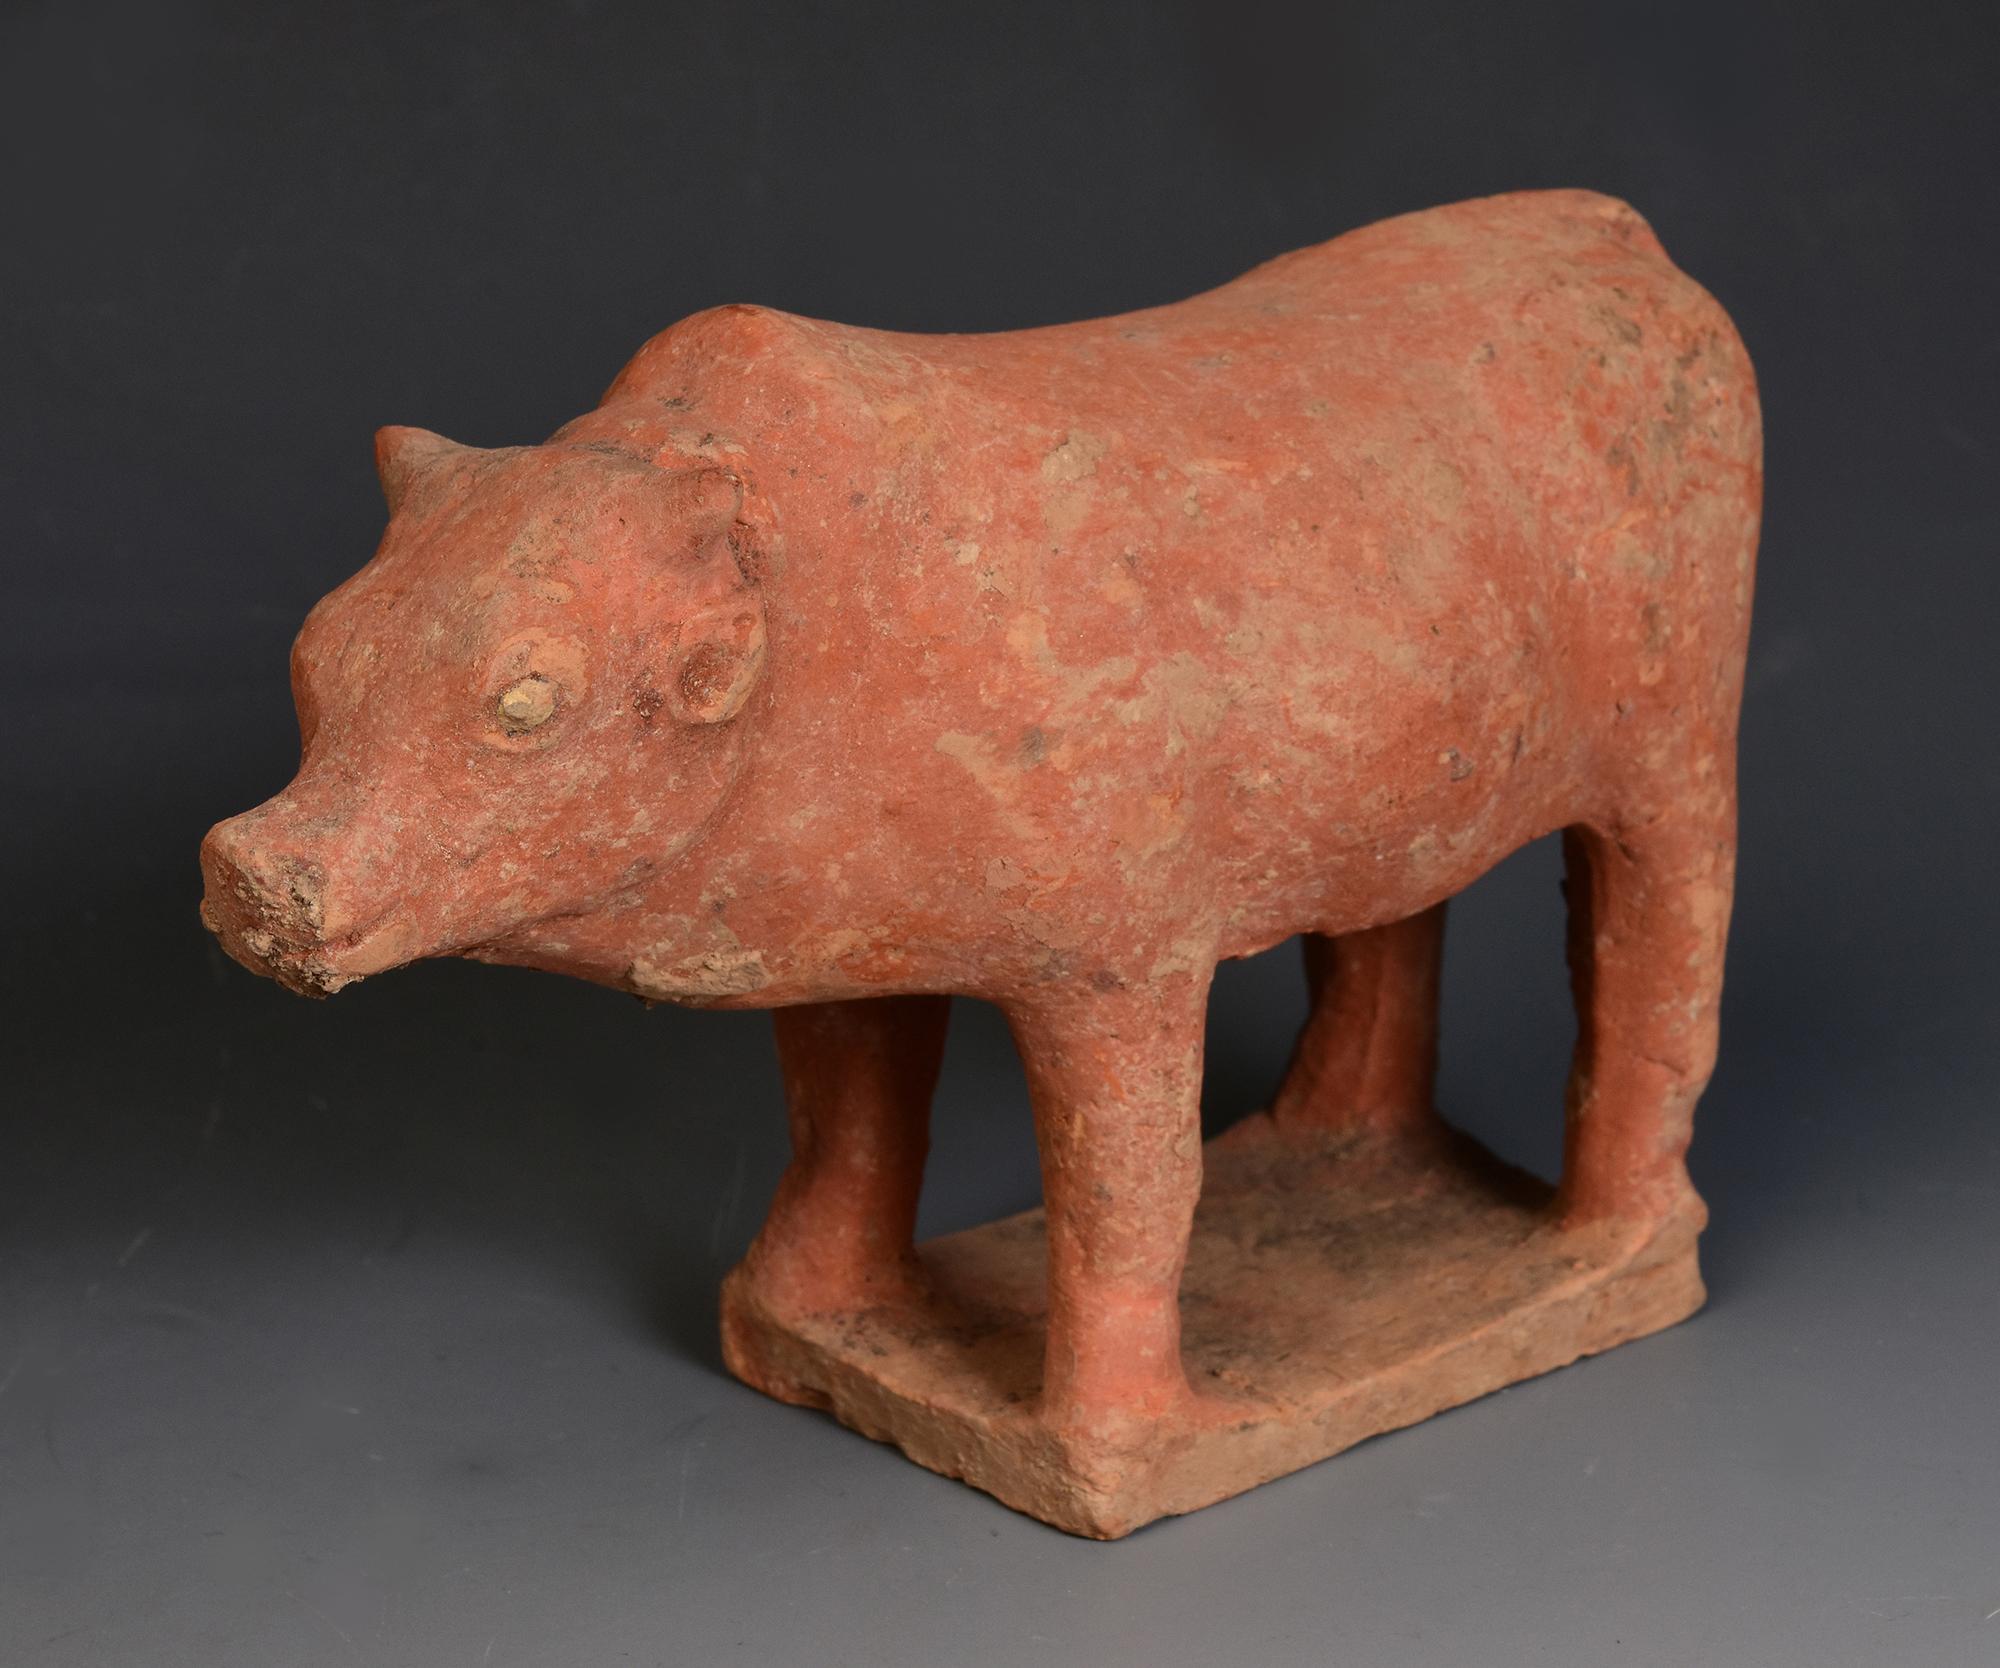 Antique Chinese pottery standing cow.

Age: China, Tang Dynasty, A.D. 618 - 907
Size: Length 16 C.M. / Width 6.7 C.M. / Height 11.3 C.M.
Condition: Well-preserved old burial condition overall with some amount of soil adhering (some abrasions and